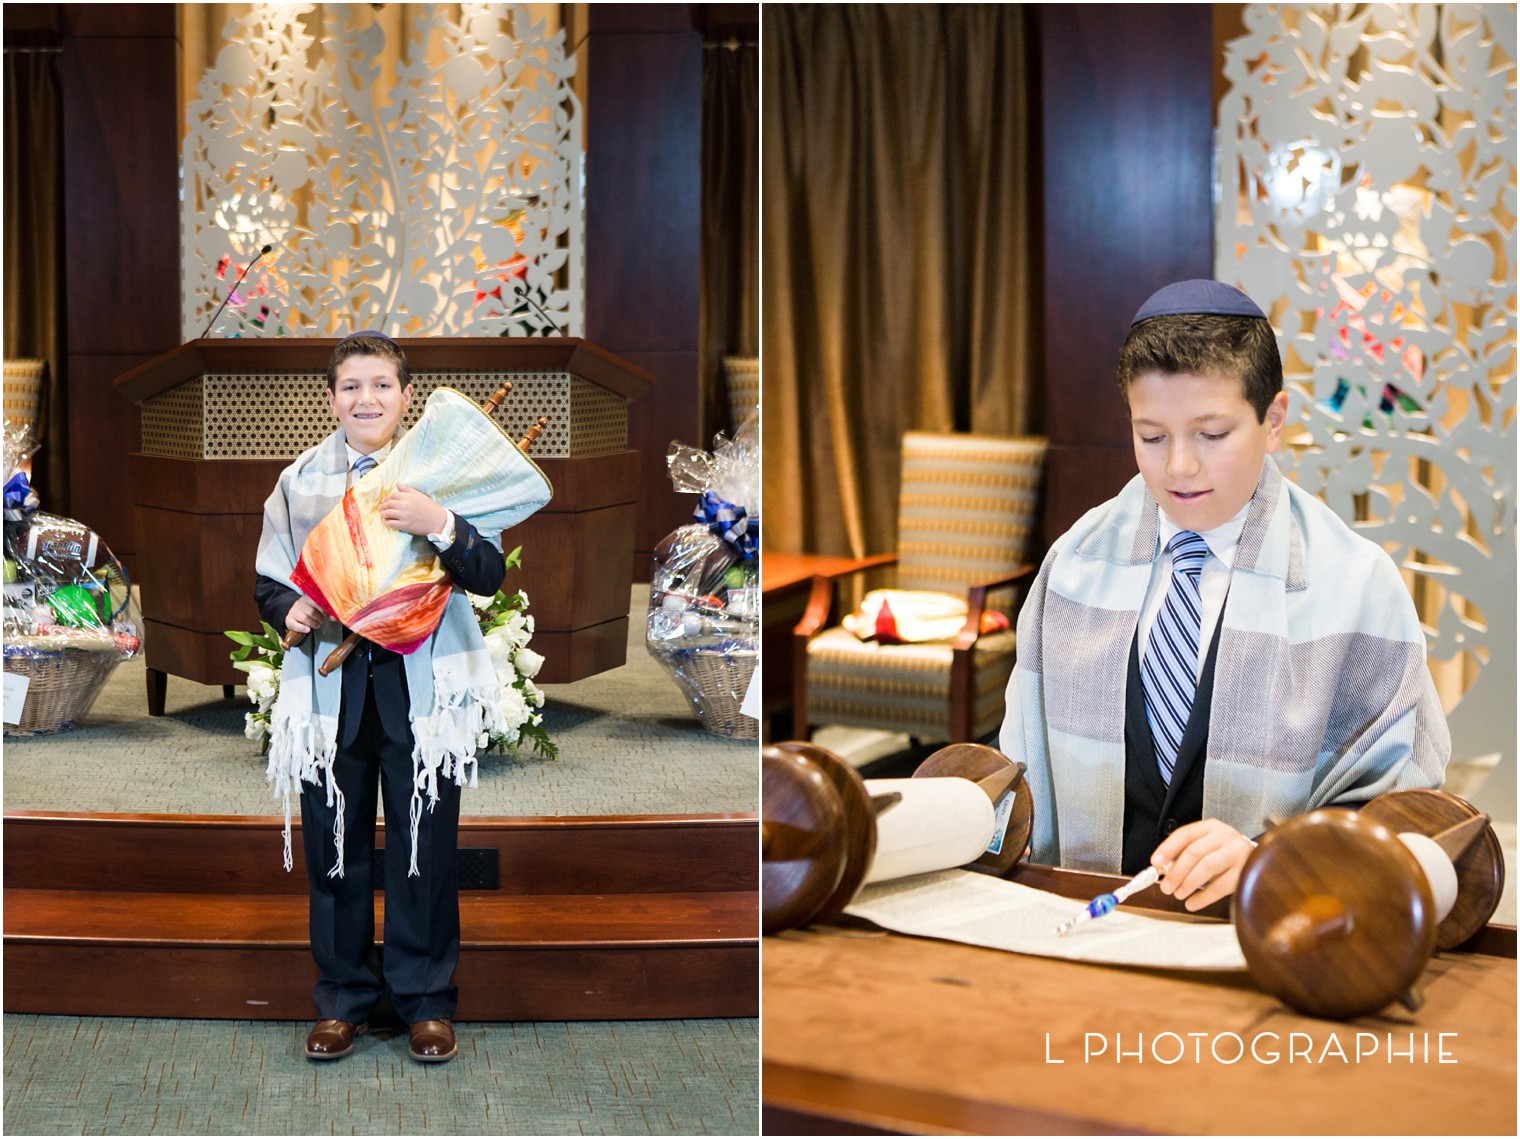 L Photographie Saint Louis bar mitzvah photography Simcha's Events Temple Israel Meadowbrook Country Club_0008.jpg